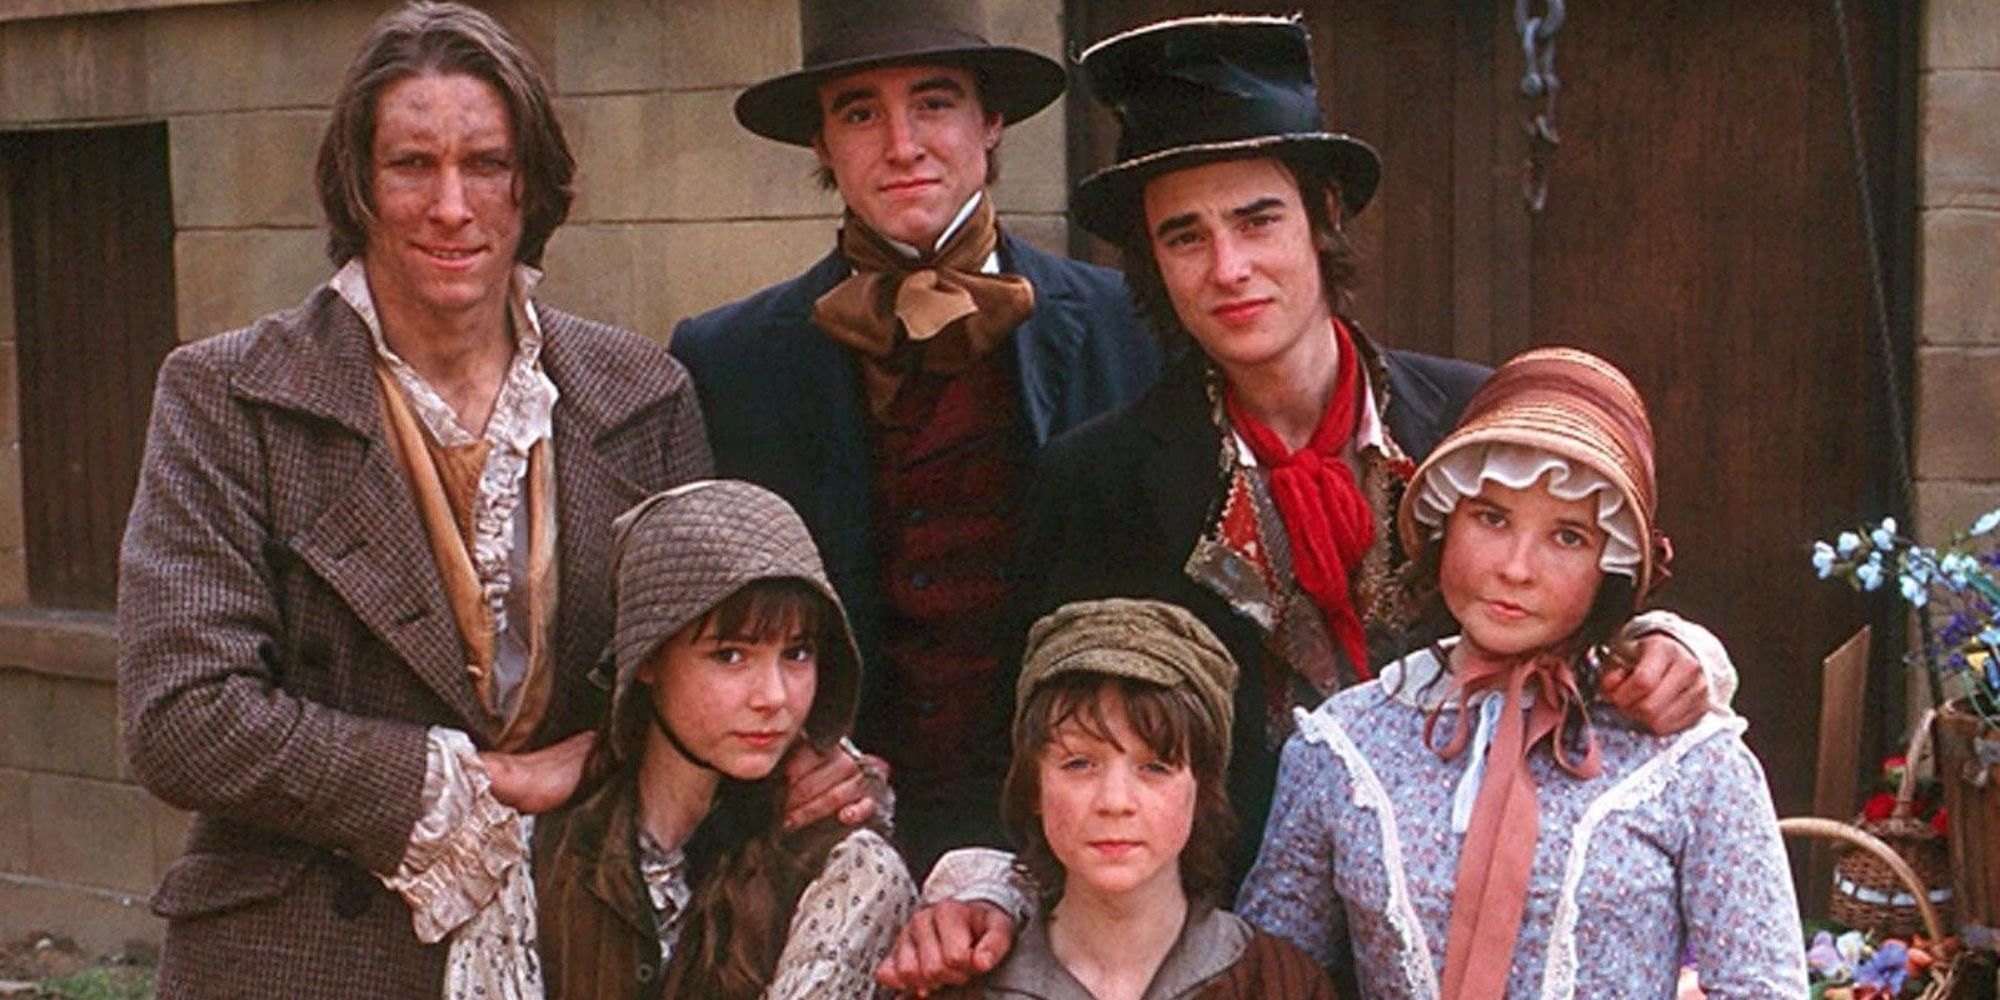 The Cast of Escape of the Artful Dodger 2001